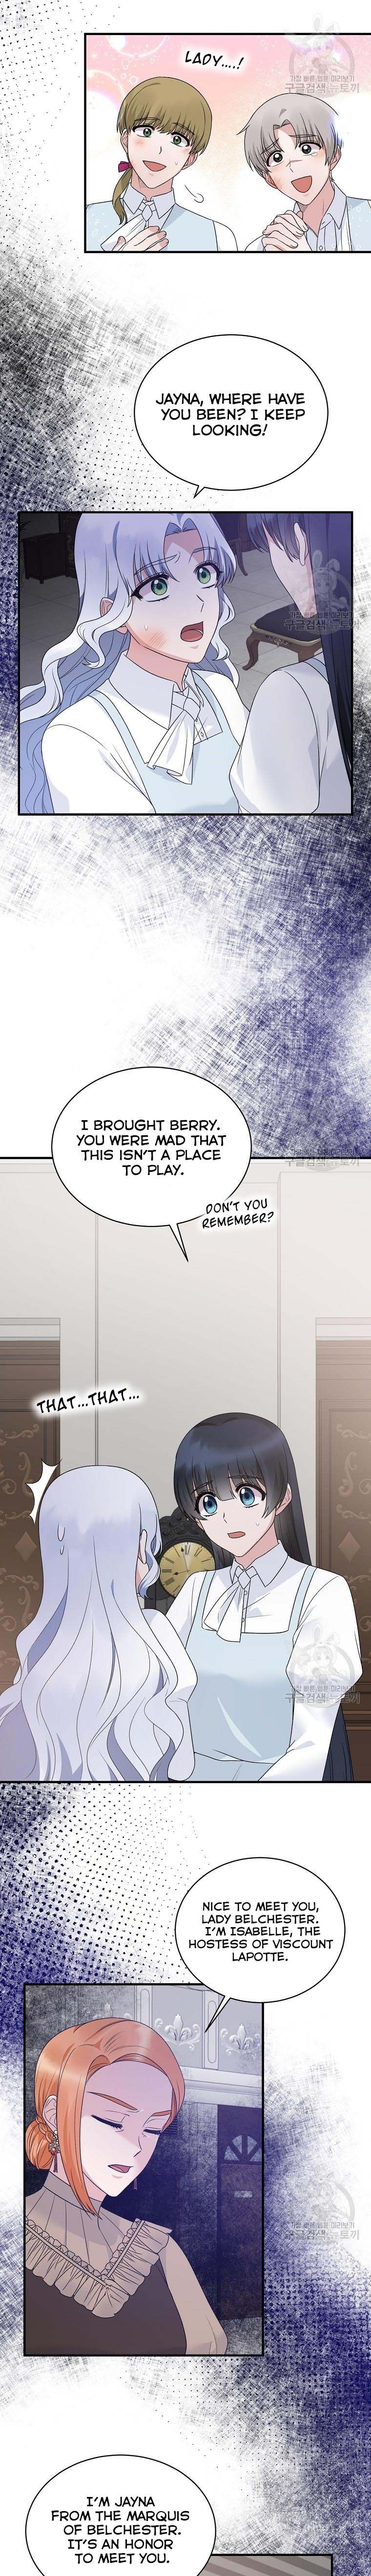 Angel or Villainess chapter 89 - Page 7